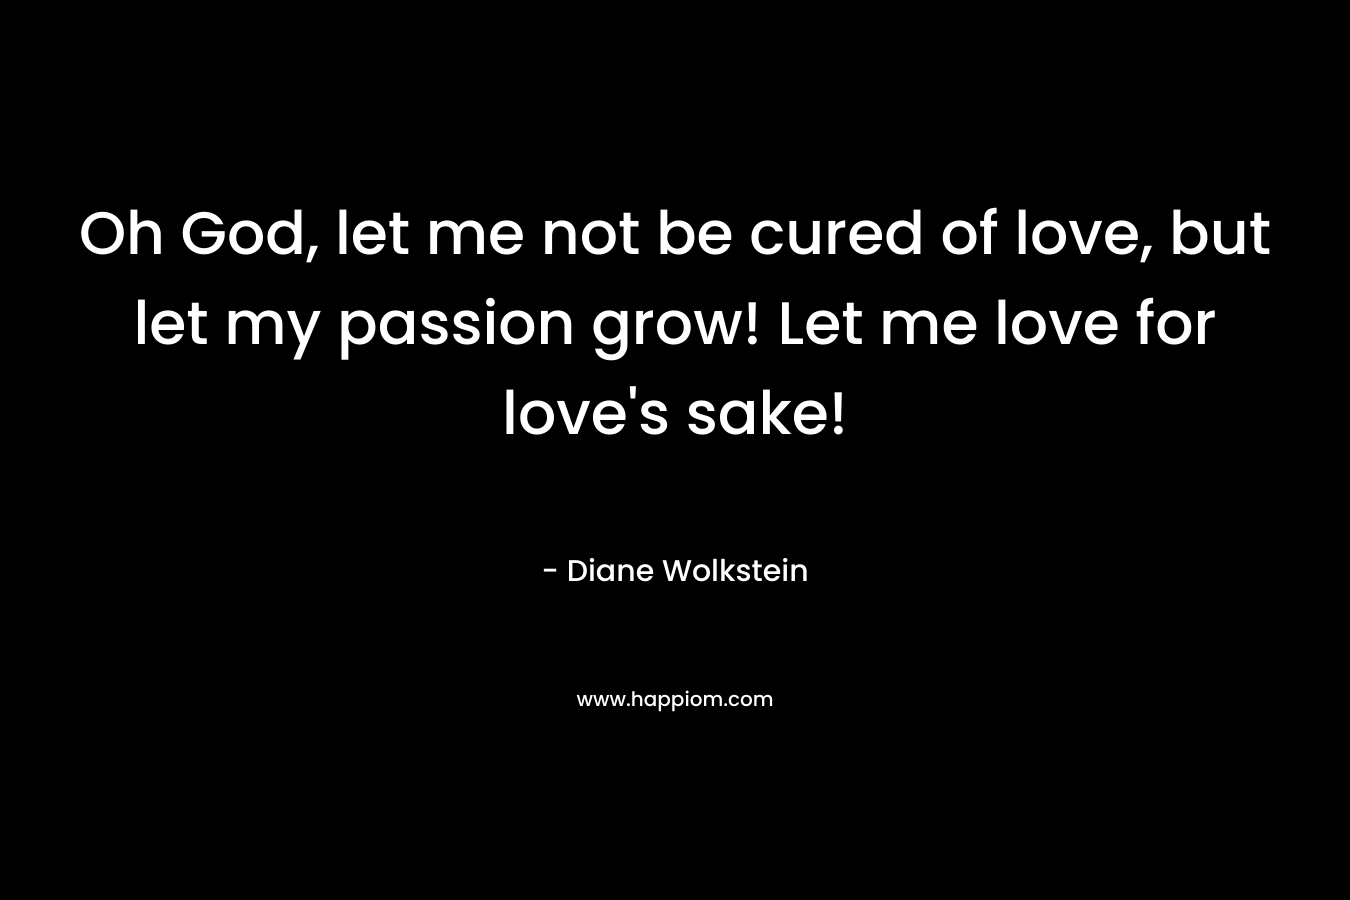 Oh God, let me not be cured of love, but let my passion grow! Let me love for love's sake!